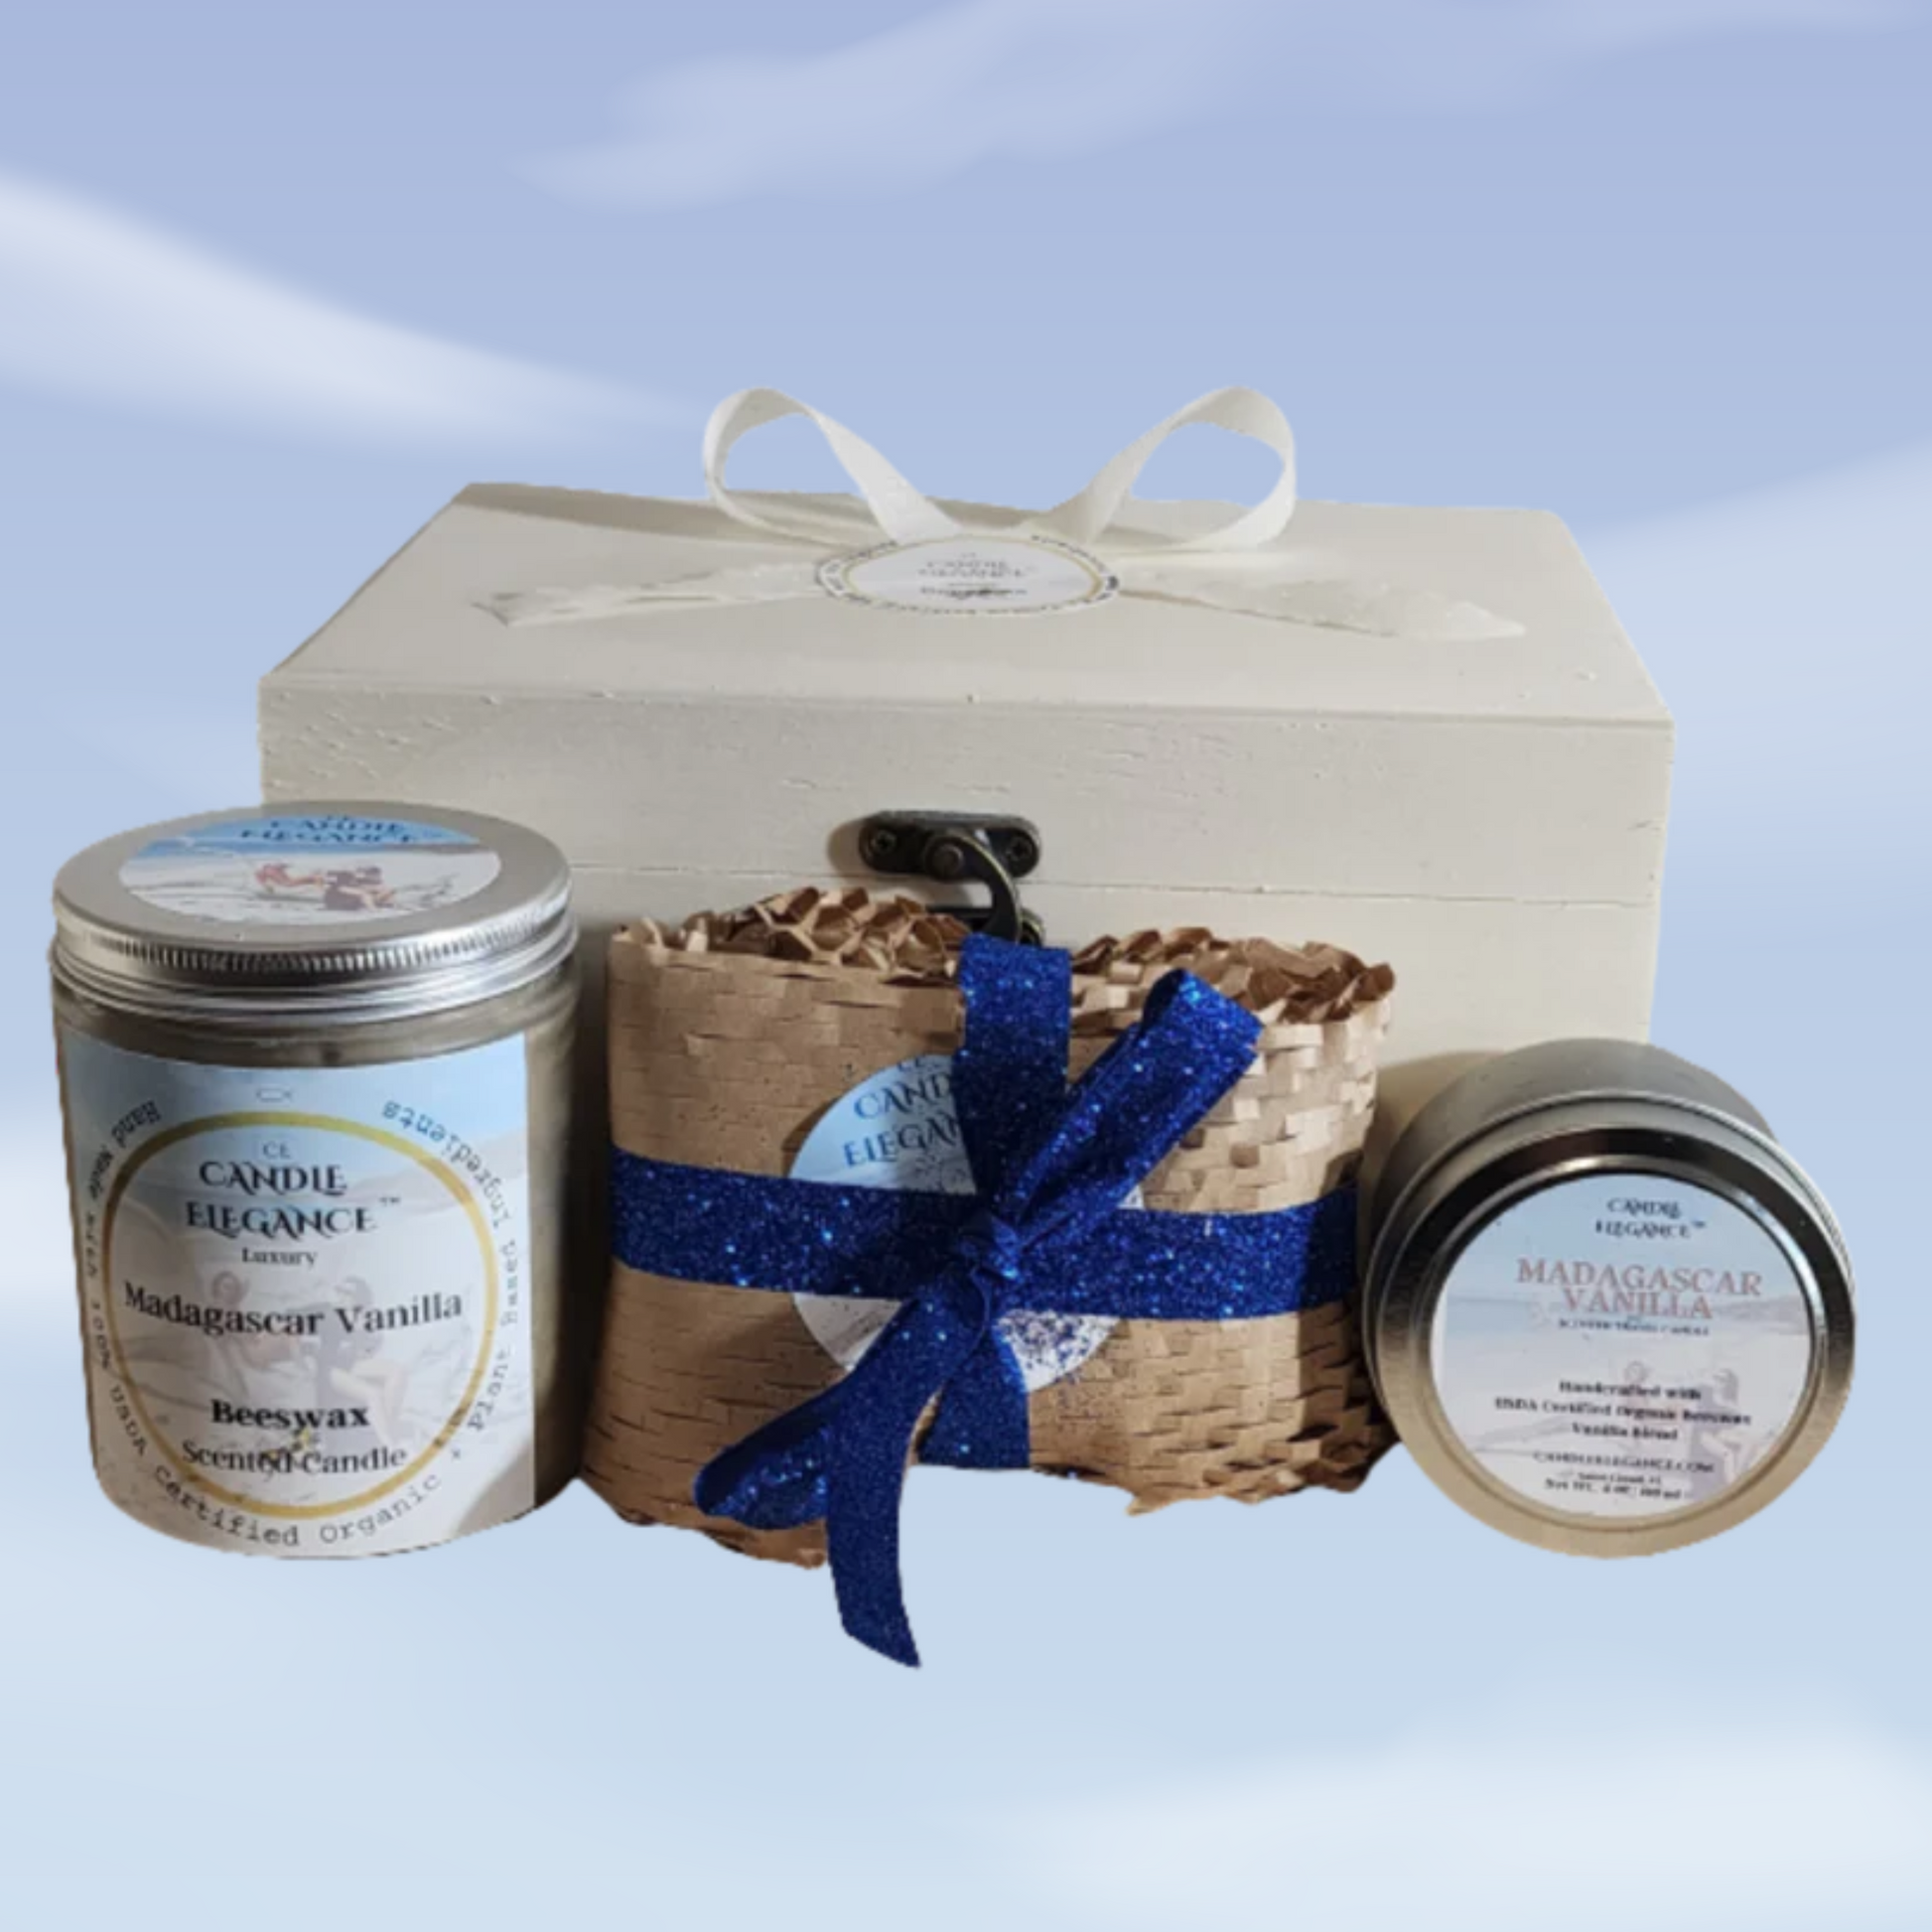 All products at Candle Elegance are made with 100% USDA  Certified Organic ingredients. in The Madagascar Vanilla Trio express is a great way to add a sweet and relaxing honey scent to your home, workplace, or travels. It features a rich and creamy scent, without fragrance of Madagascar vanilla beans.